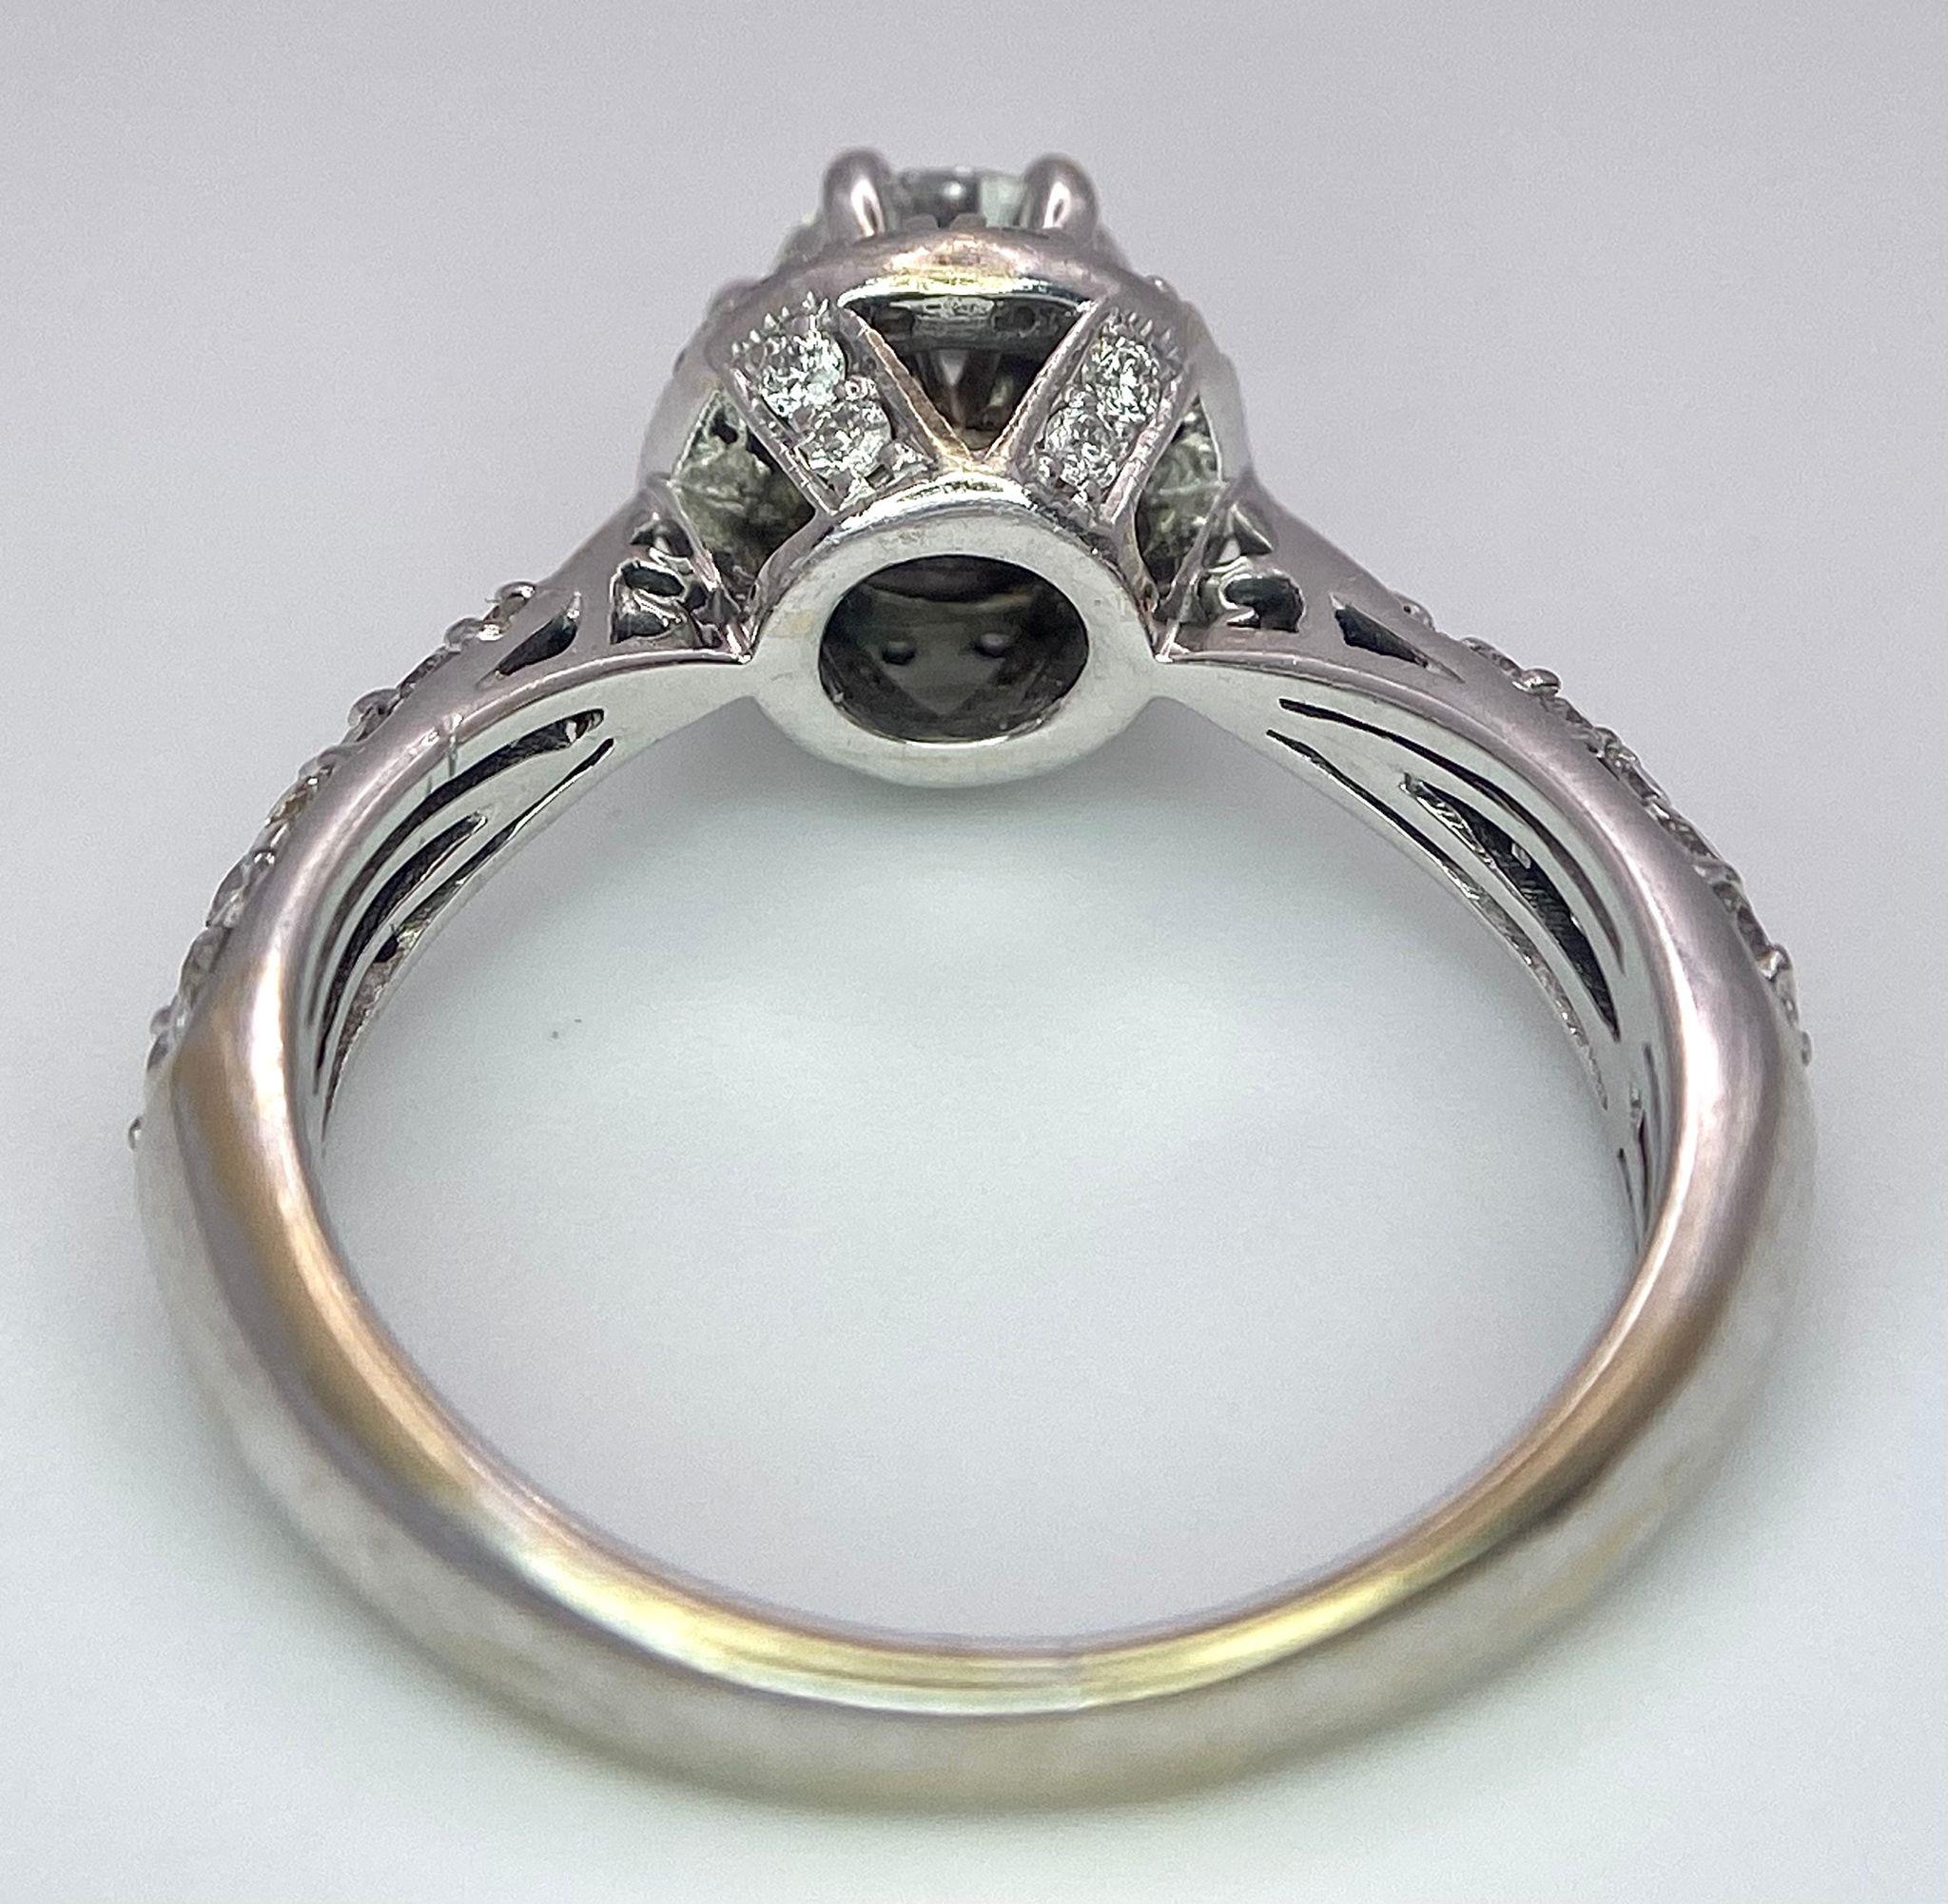 An 18K White Gold Diamond Ring. Central 0.75ct brilliant round cut diamond with a diamond halo and - Image 7 of 10